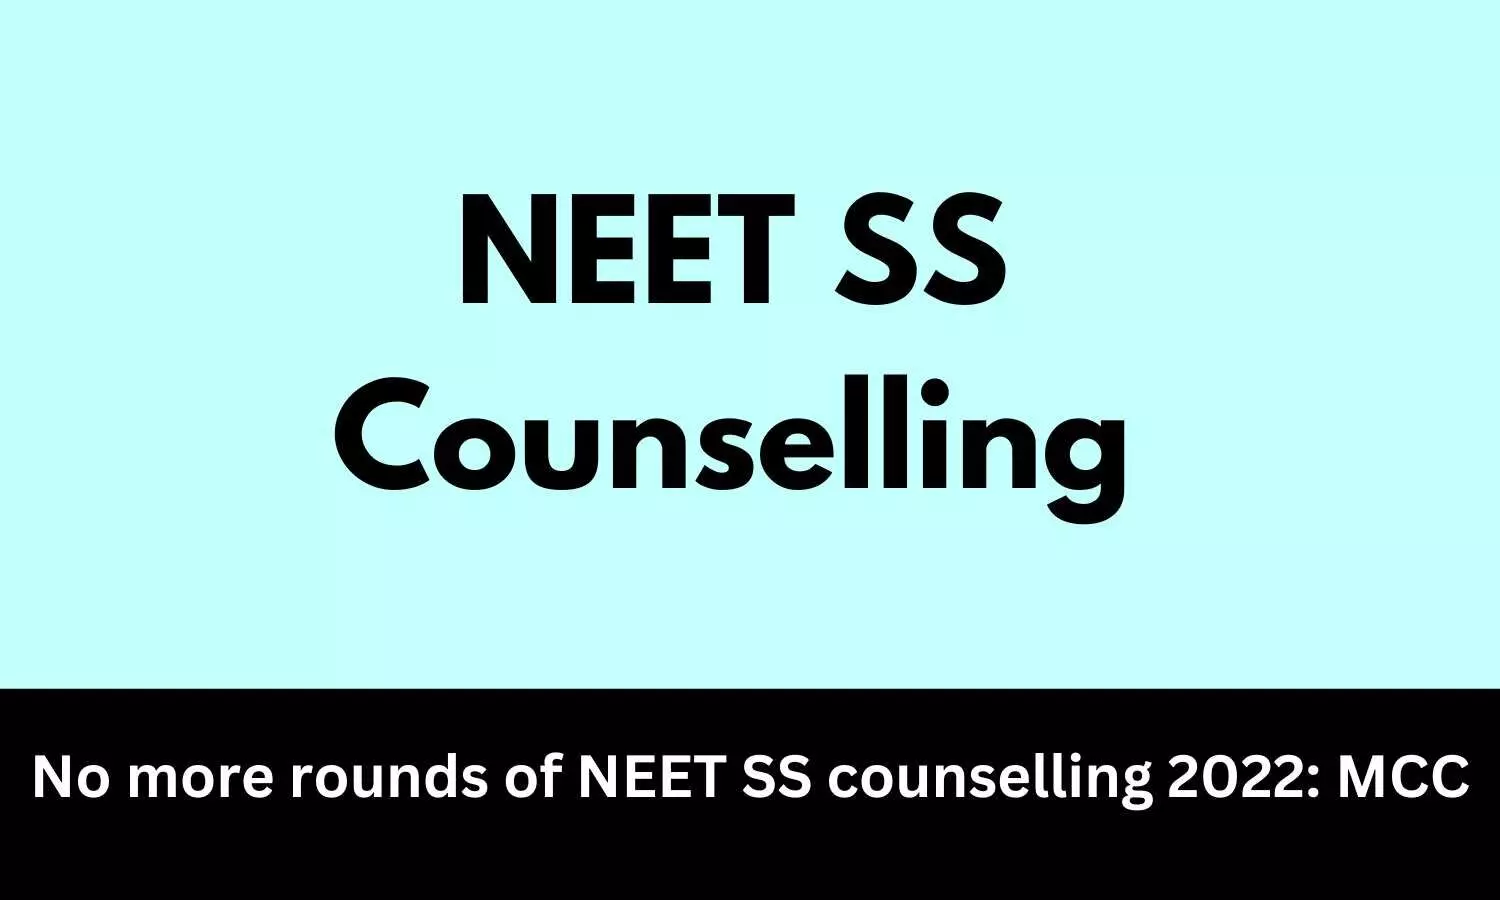 NEET SS Counselling 2022: MCC not to conduct more rounds